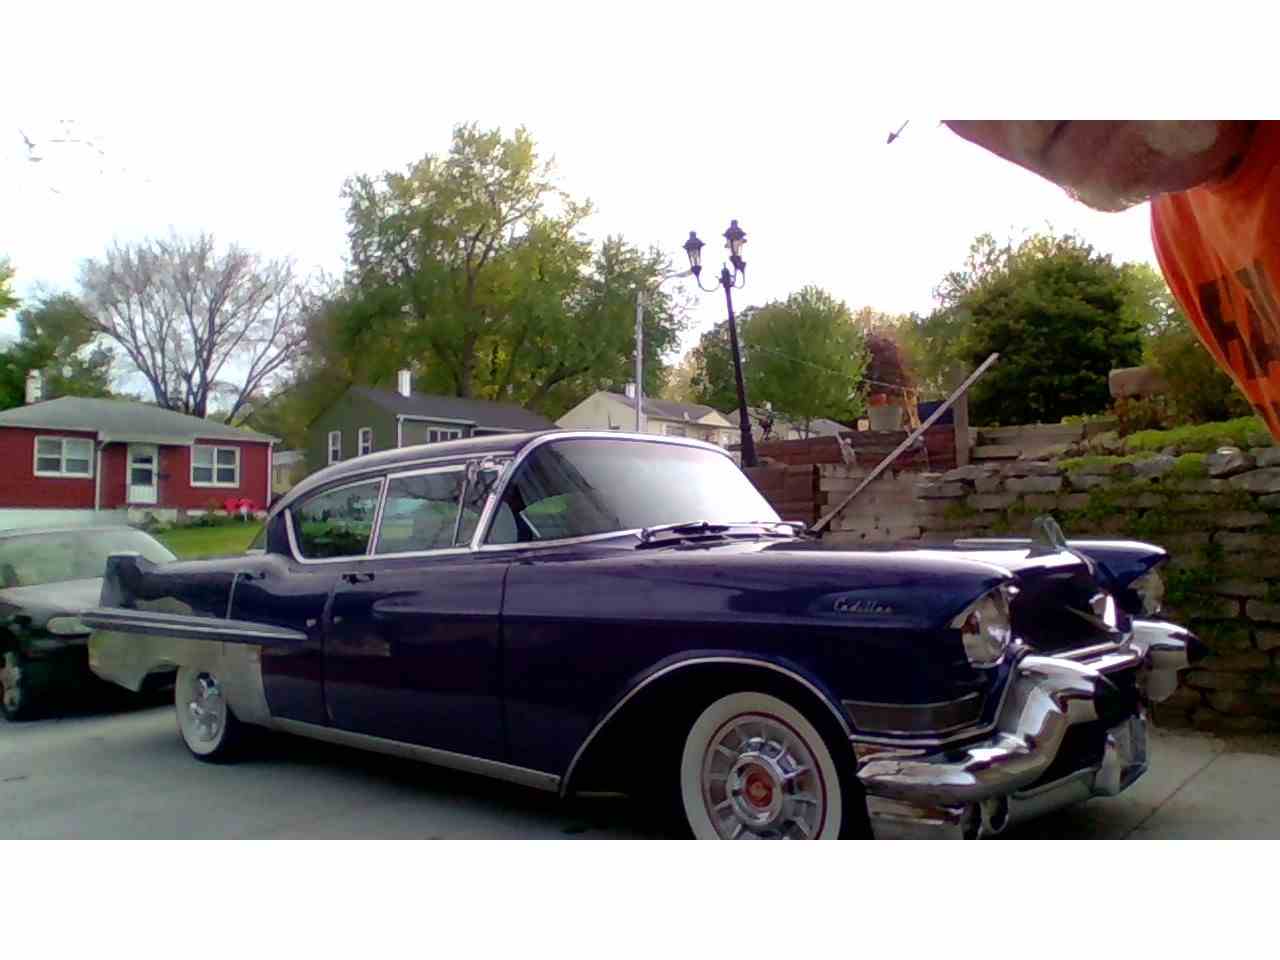 1957 Cadillac Fleetwood 60 For Sale Classiccars Cc 979316 and The Most Brilliant classic cars omaha for Your favorite car reference